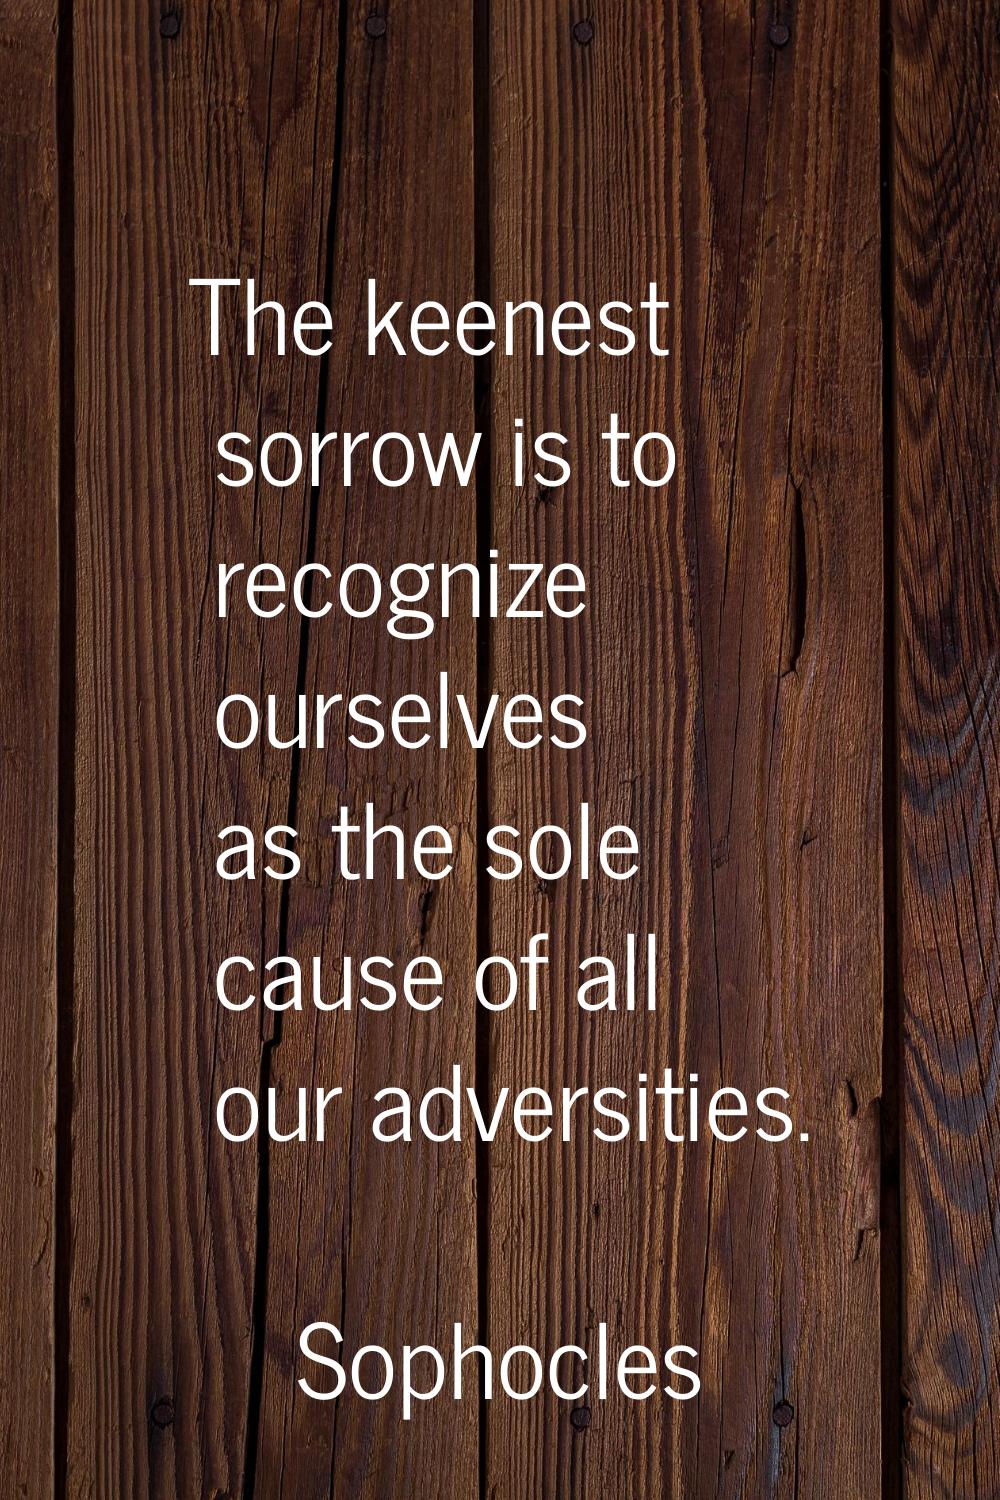 The keenest sorrow is to recognize ourselves as the sole cause of all our adversities.